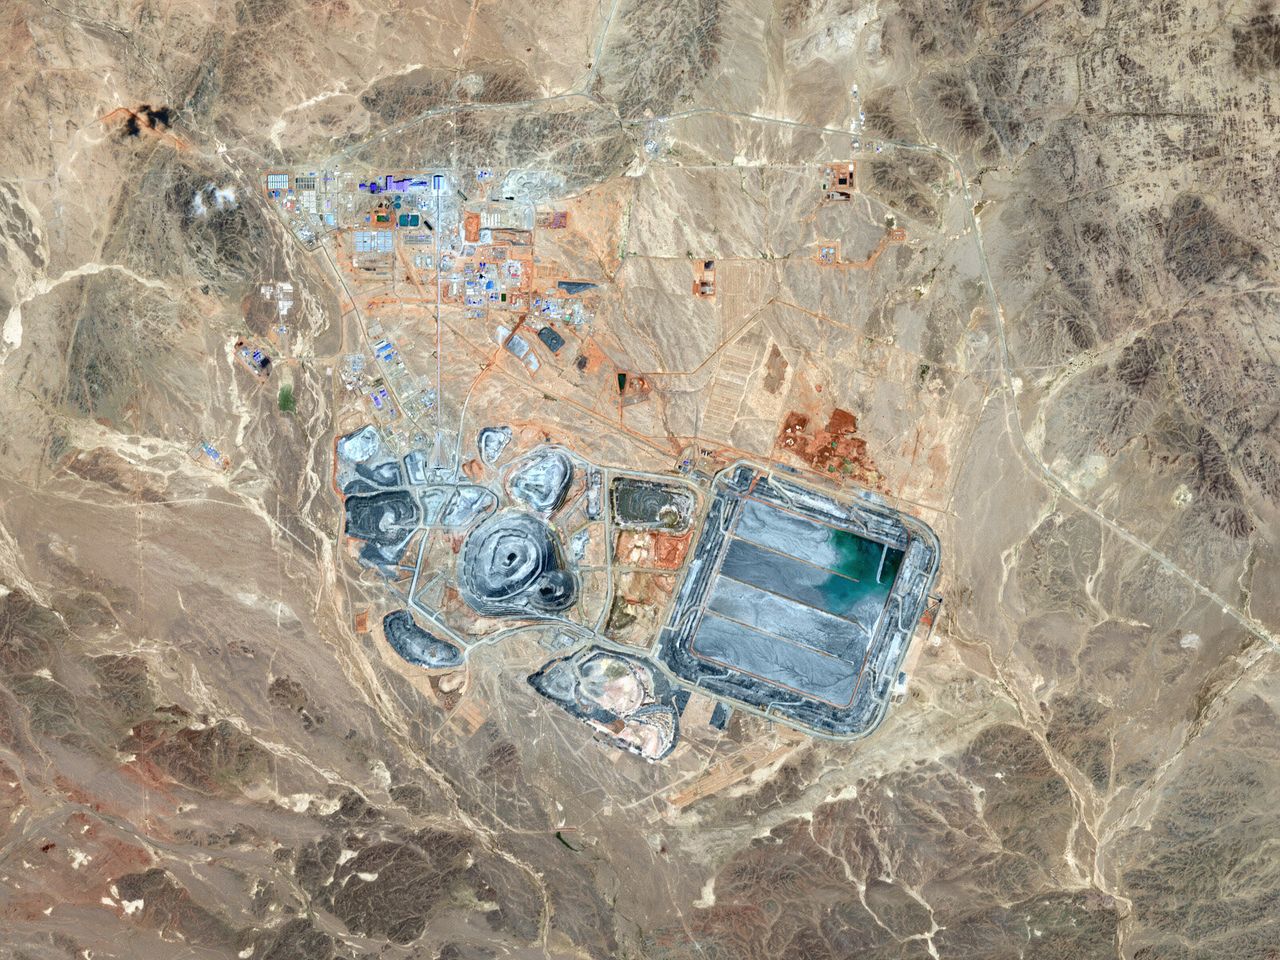 The Oyu Tolgoi mine seen from space.